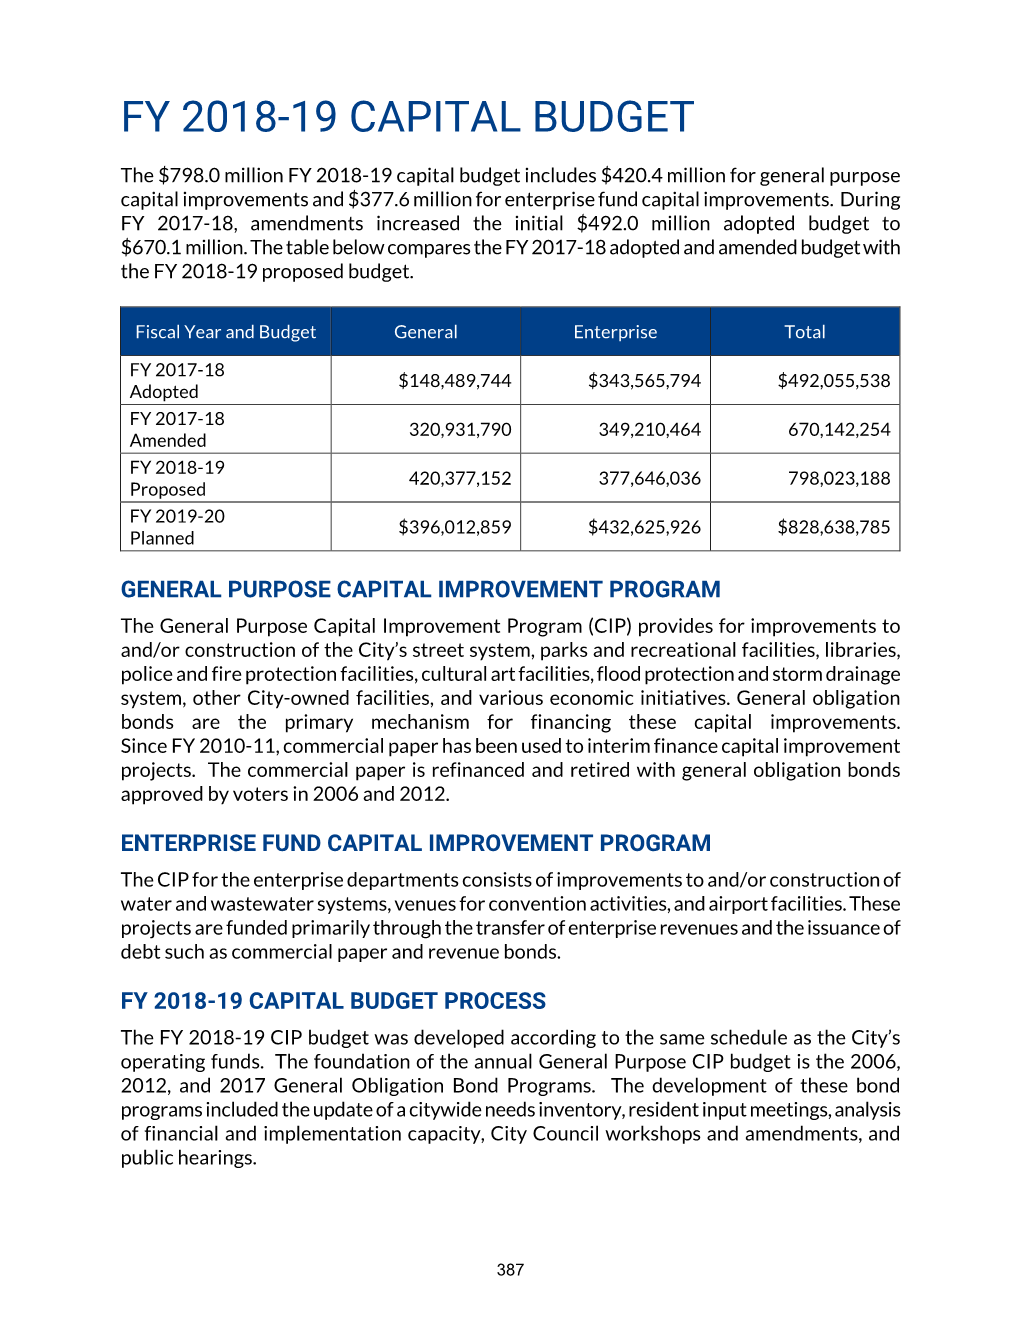 Capital Improvement Budget Portion of This Document Is Composed of the Following Sections